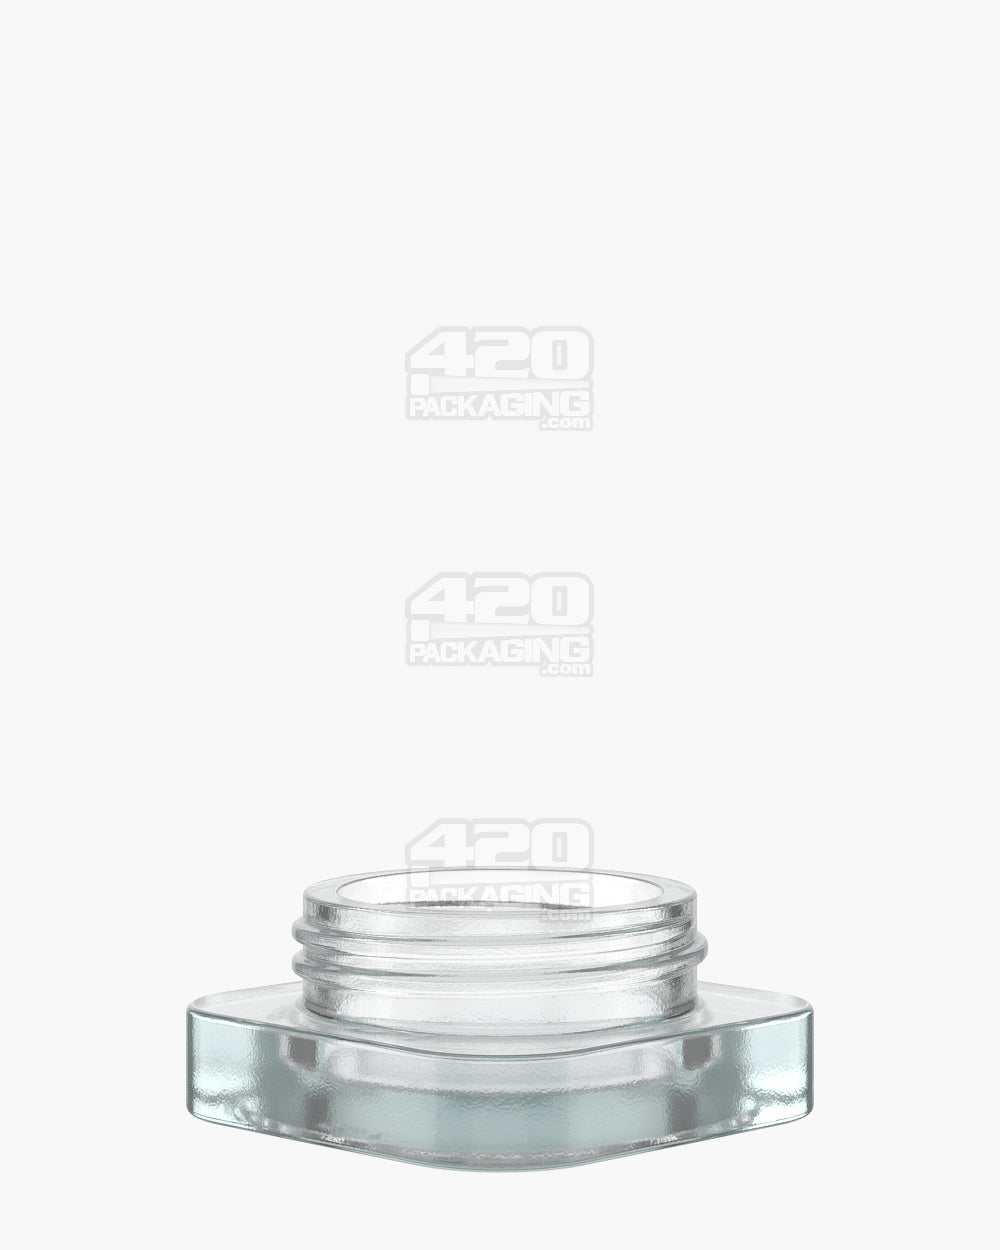 38mm Pollen Gear SoftSquare Clear 5ml Glass Concentrate Jar 360/Box - 1